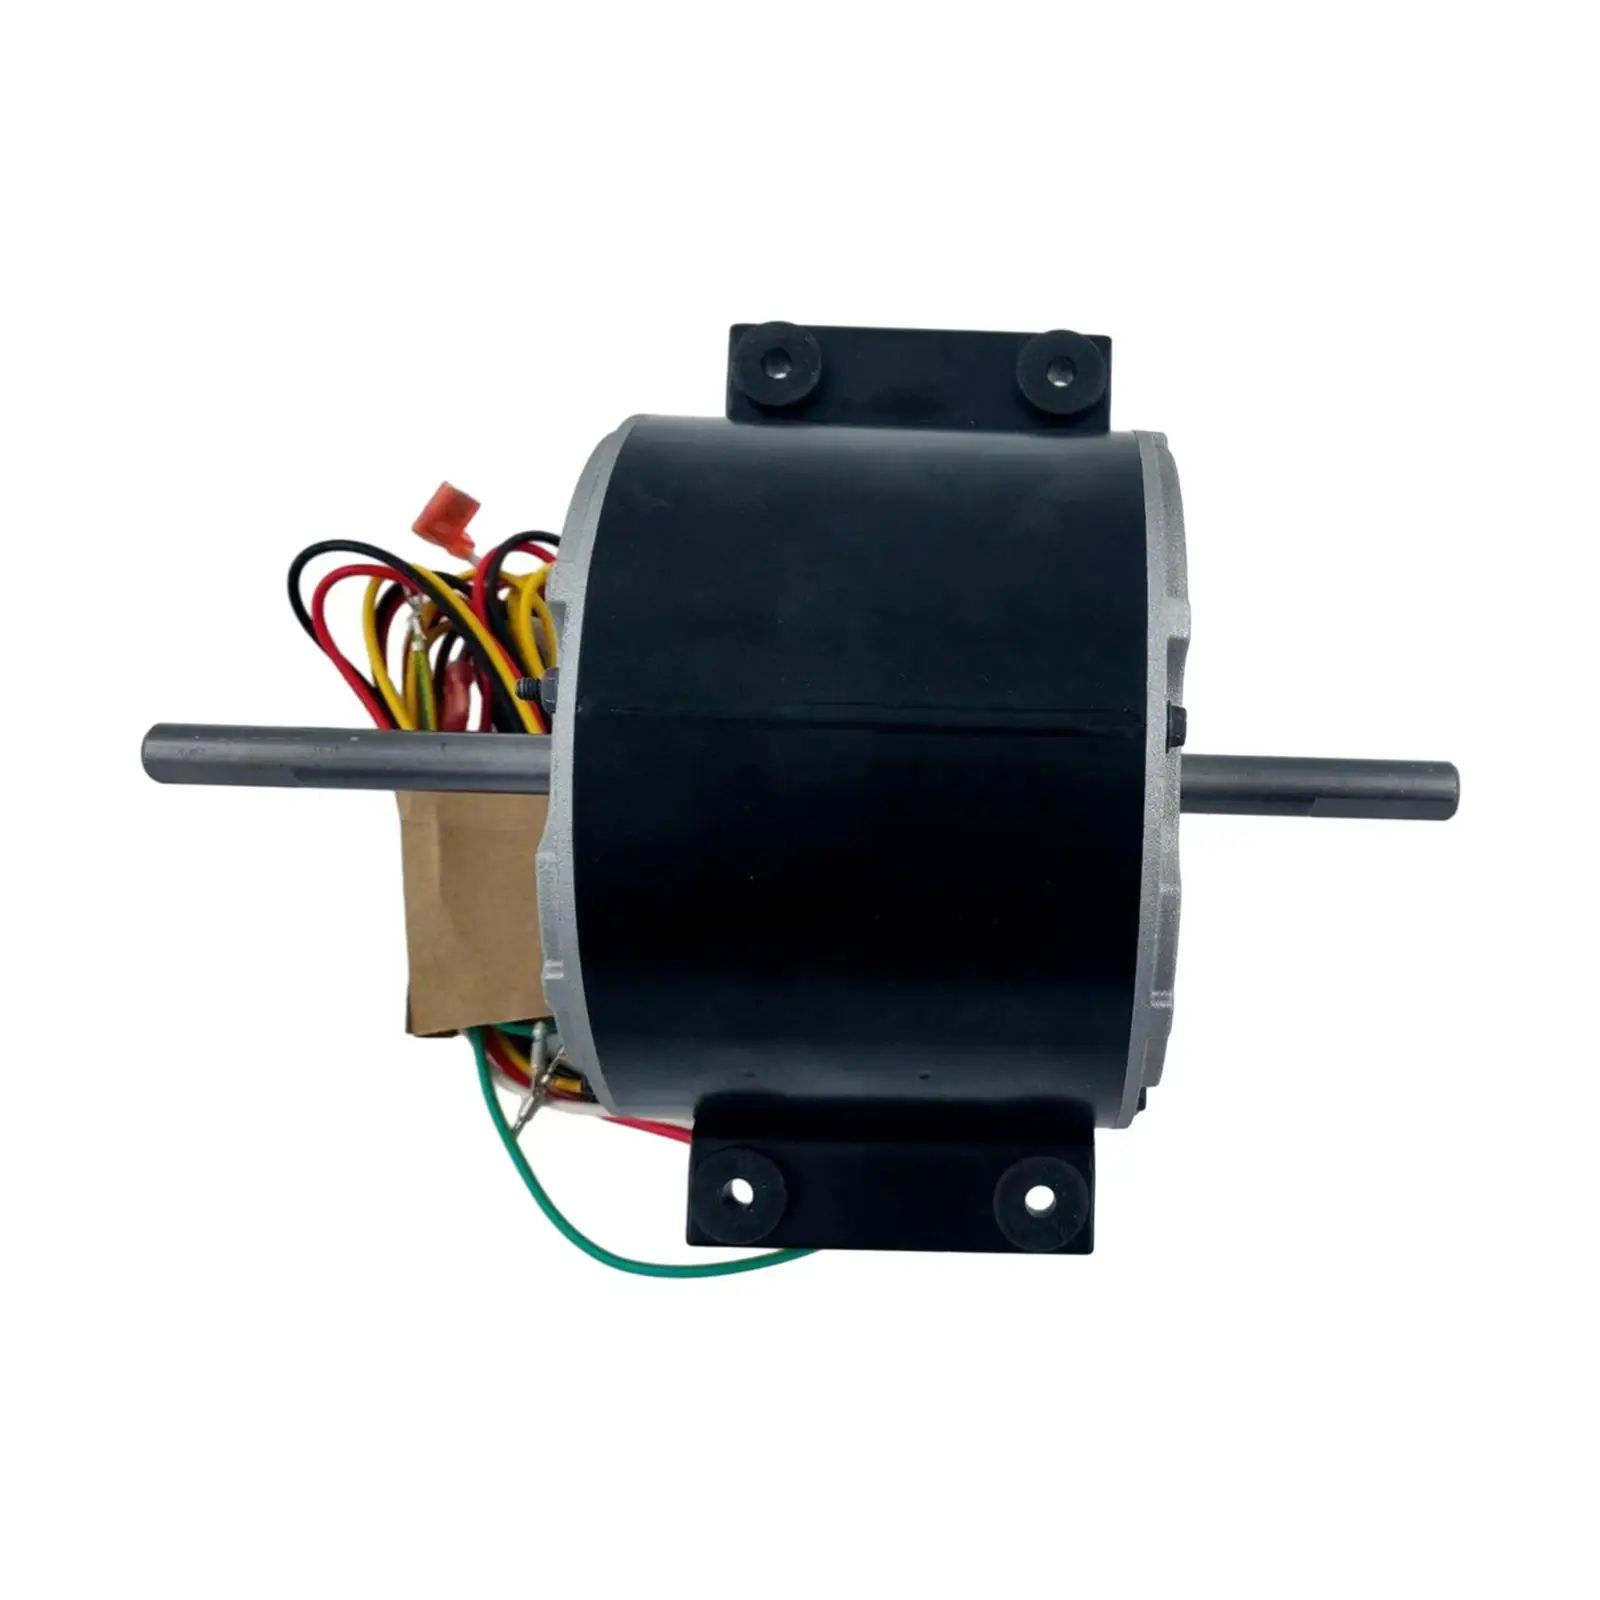 Condenser Fan Motor 3315332.005 Replacement Parts 3 Speed for II Penguin B57915 B59186 B59146 Easy Installation